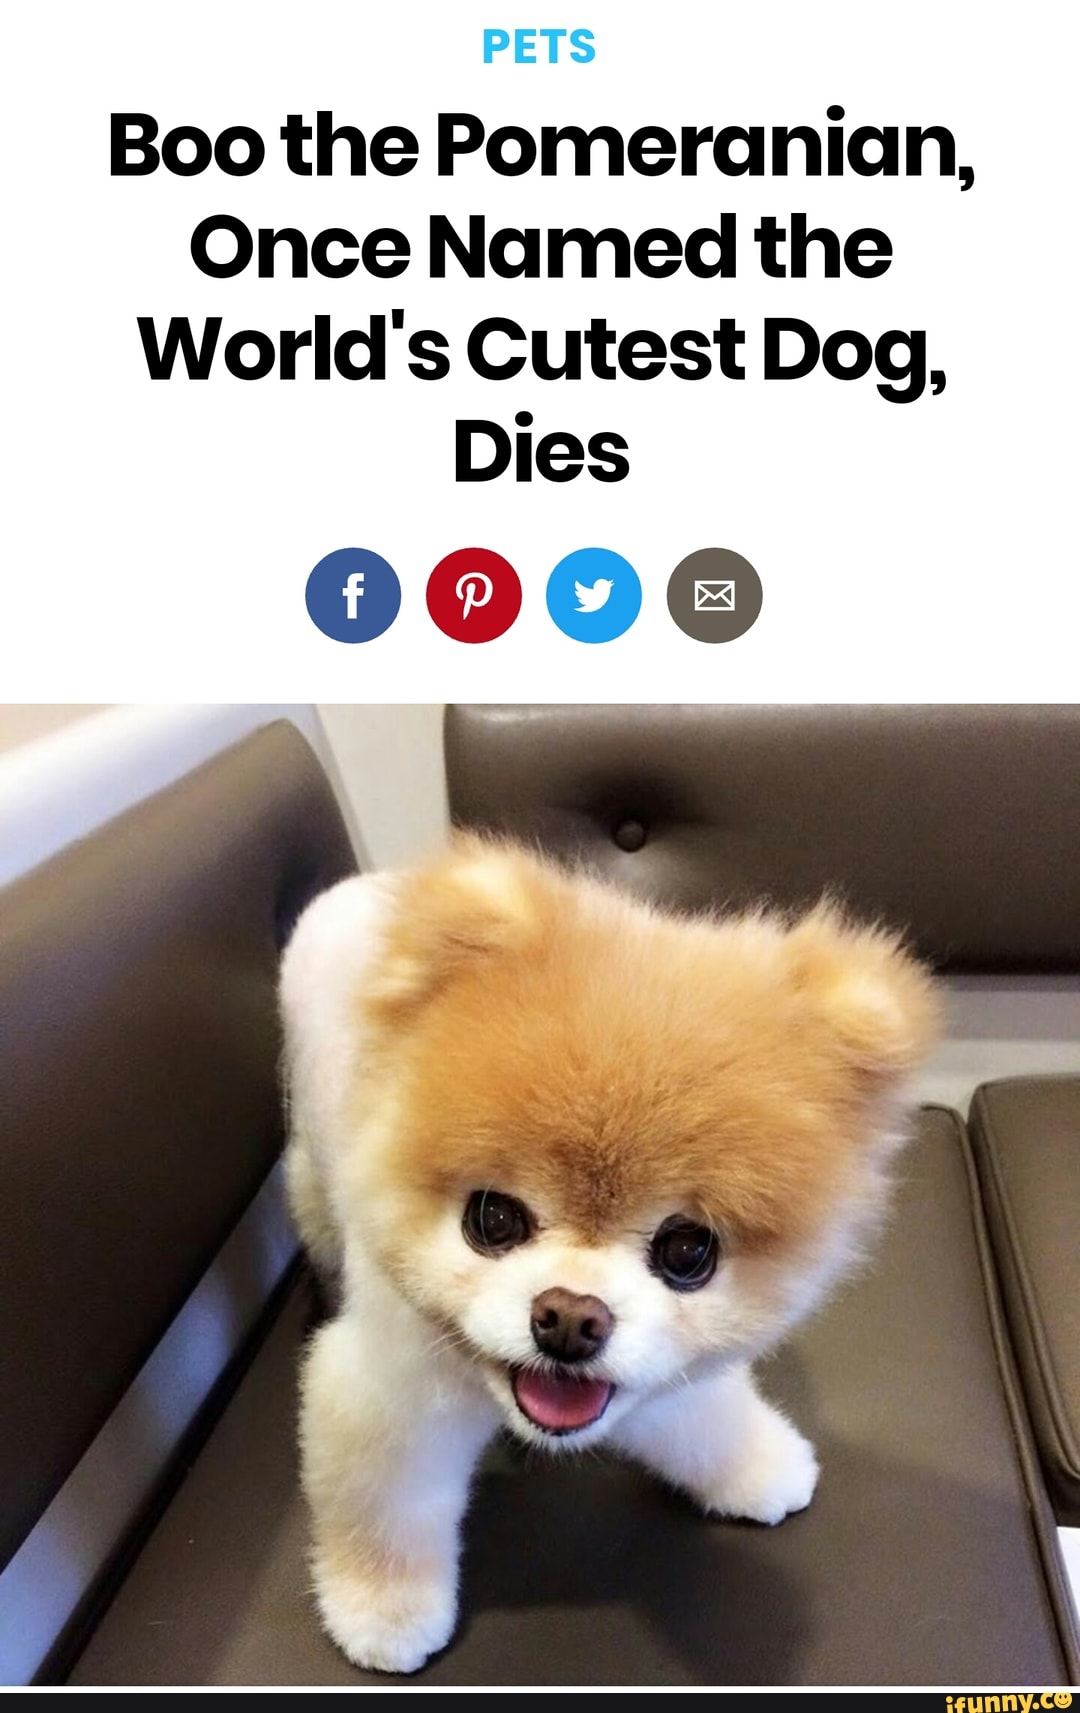 Boo the Pomeranian, Once Named the World's Cutest Dog, Dies